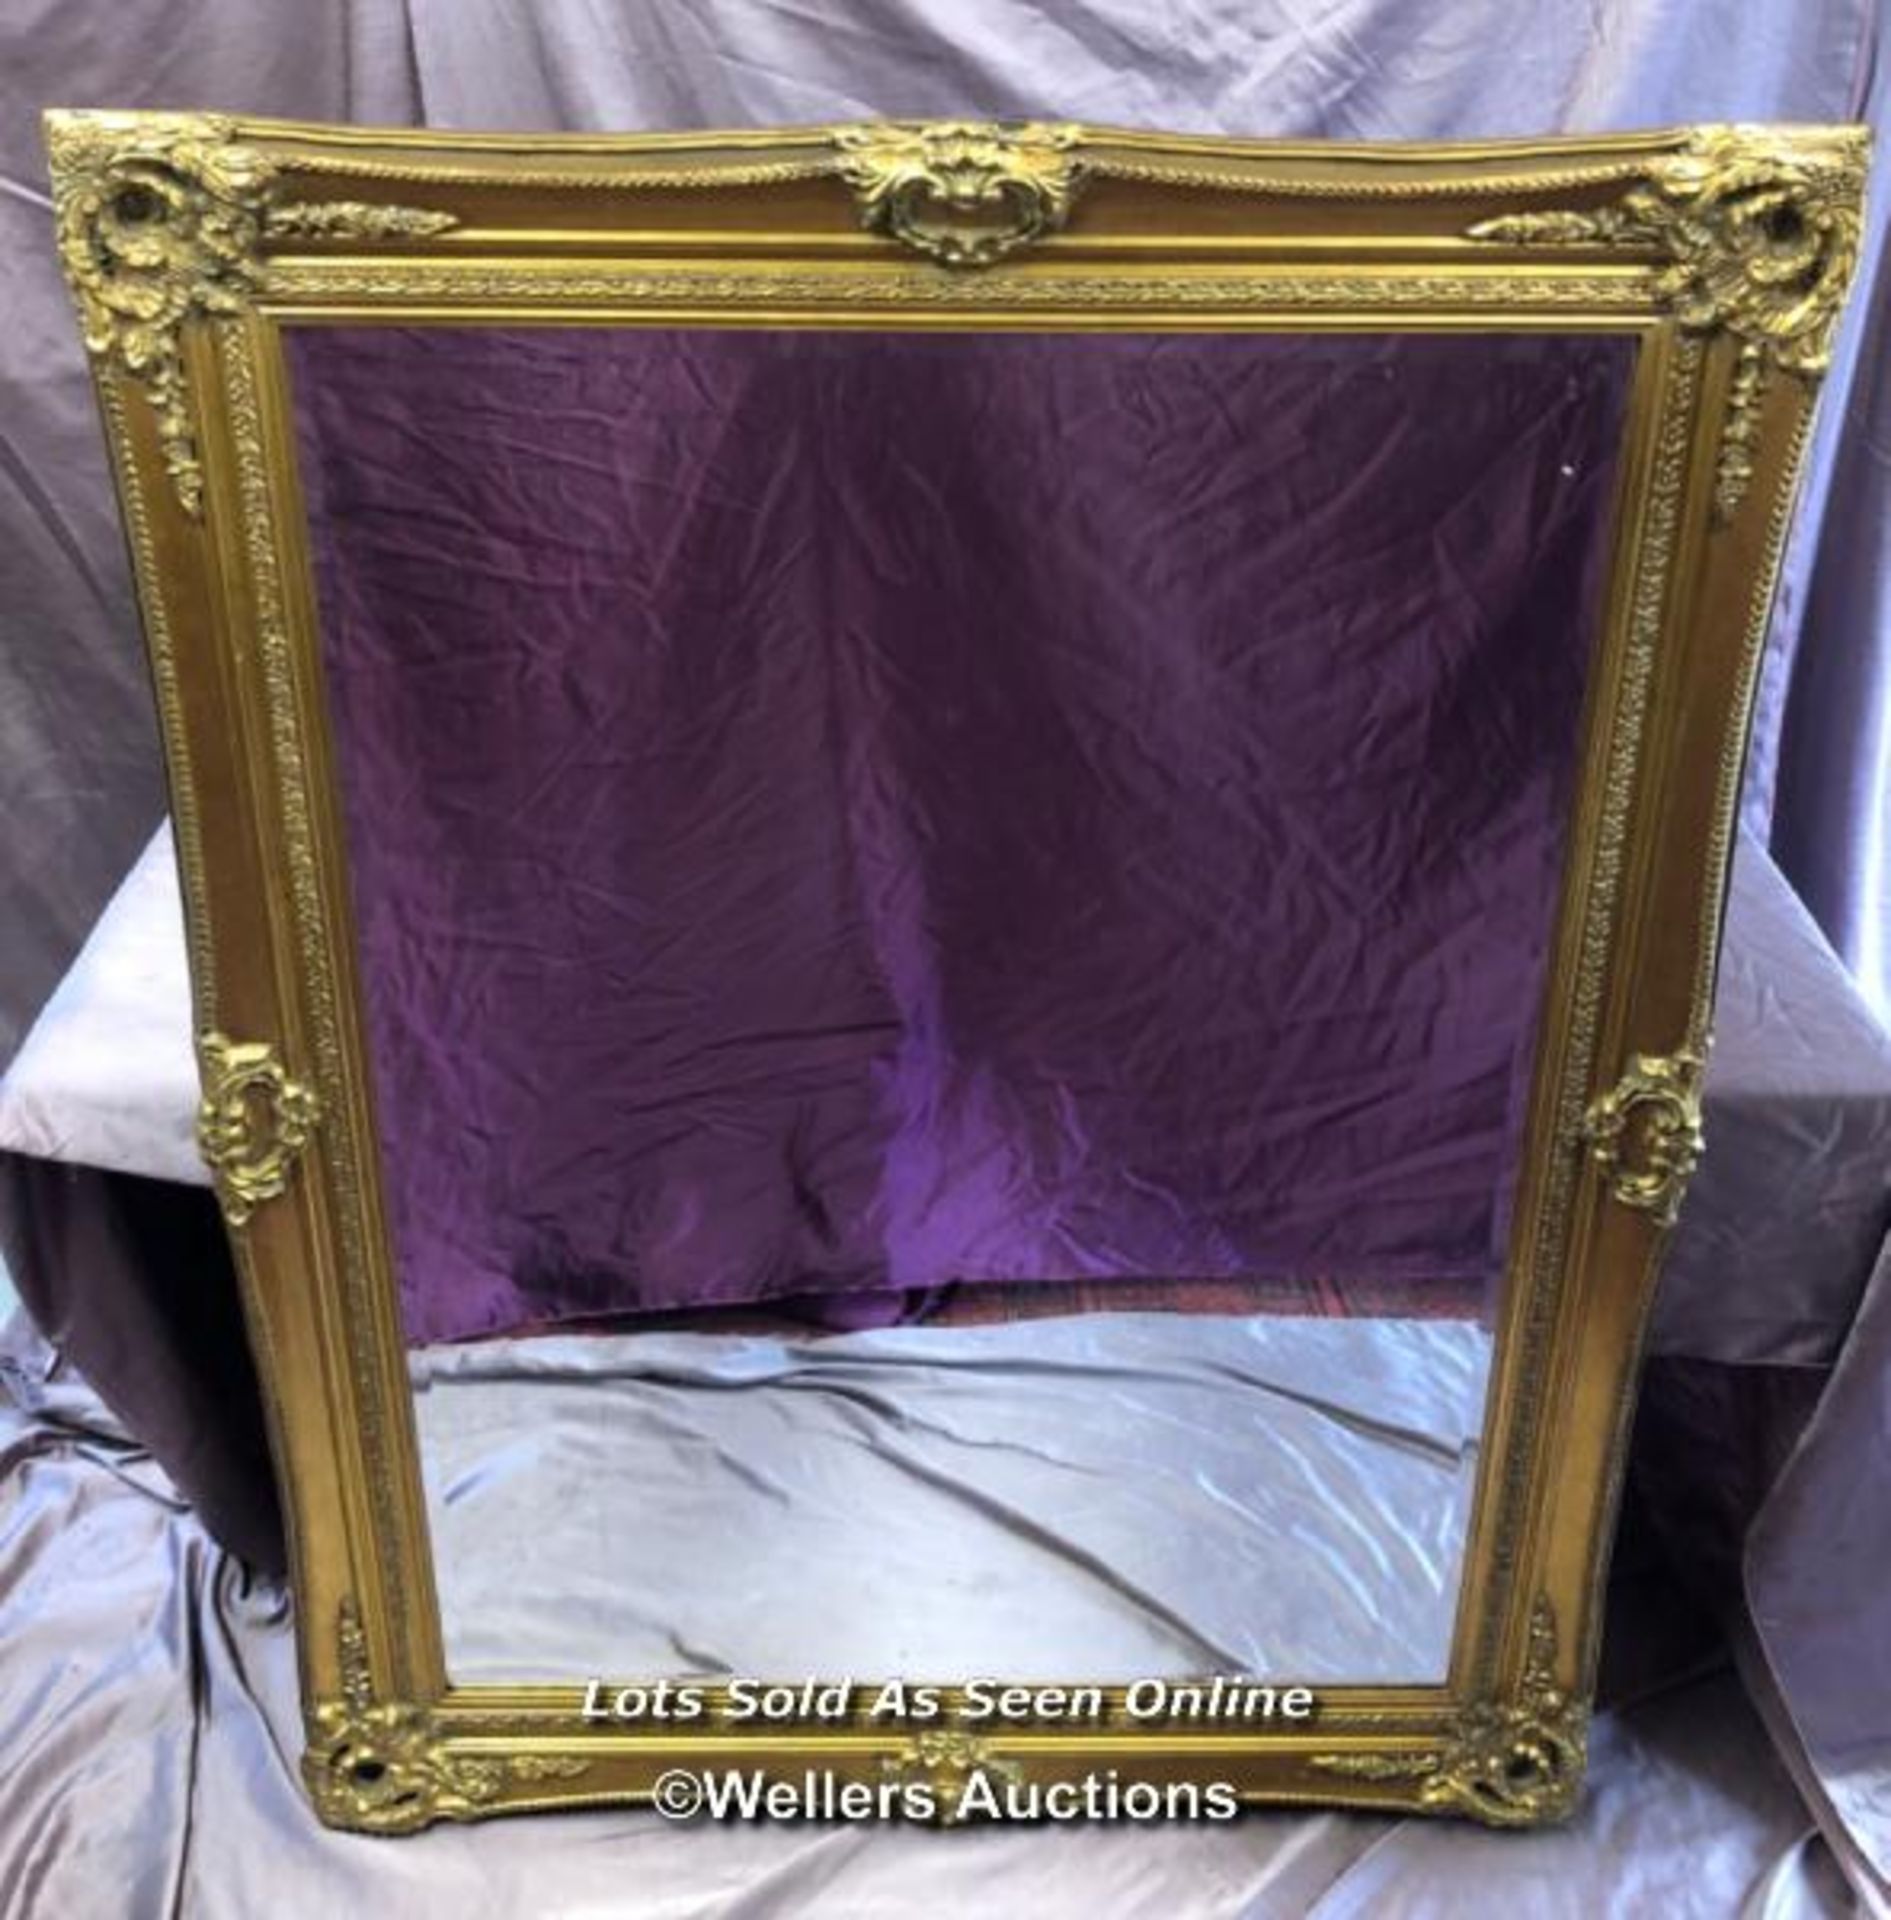 LARGE BEVELLED EDGE ANTIQUE STYLE MIRROR WITH DECORATIVE GILT FRAME, 114 X 147CM